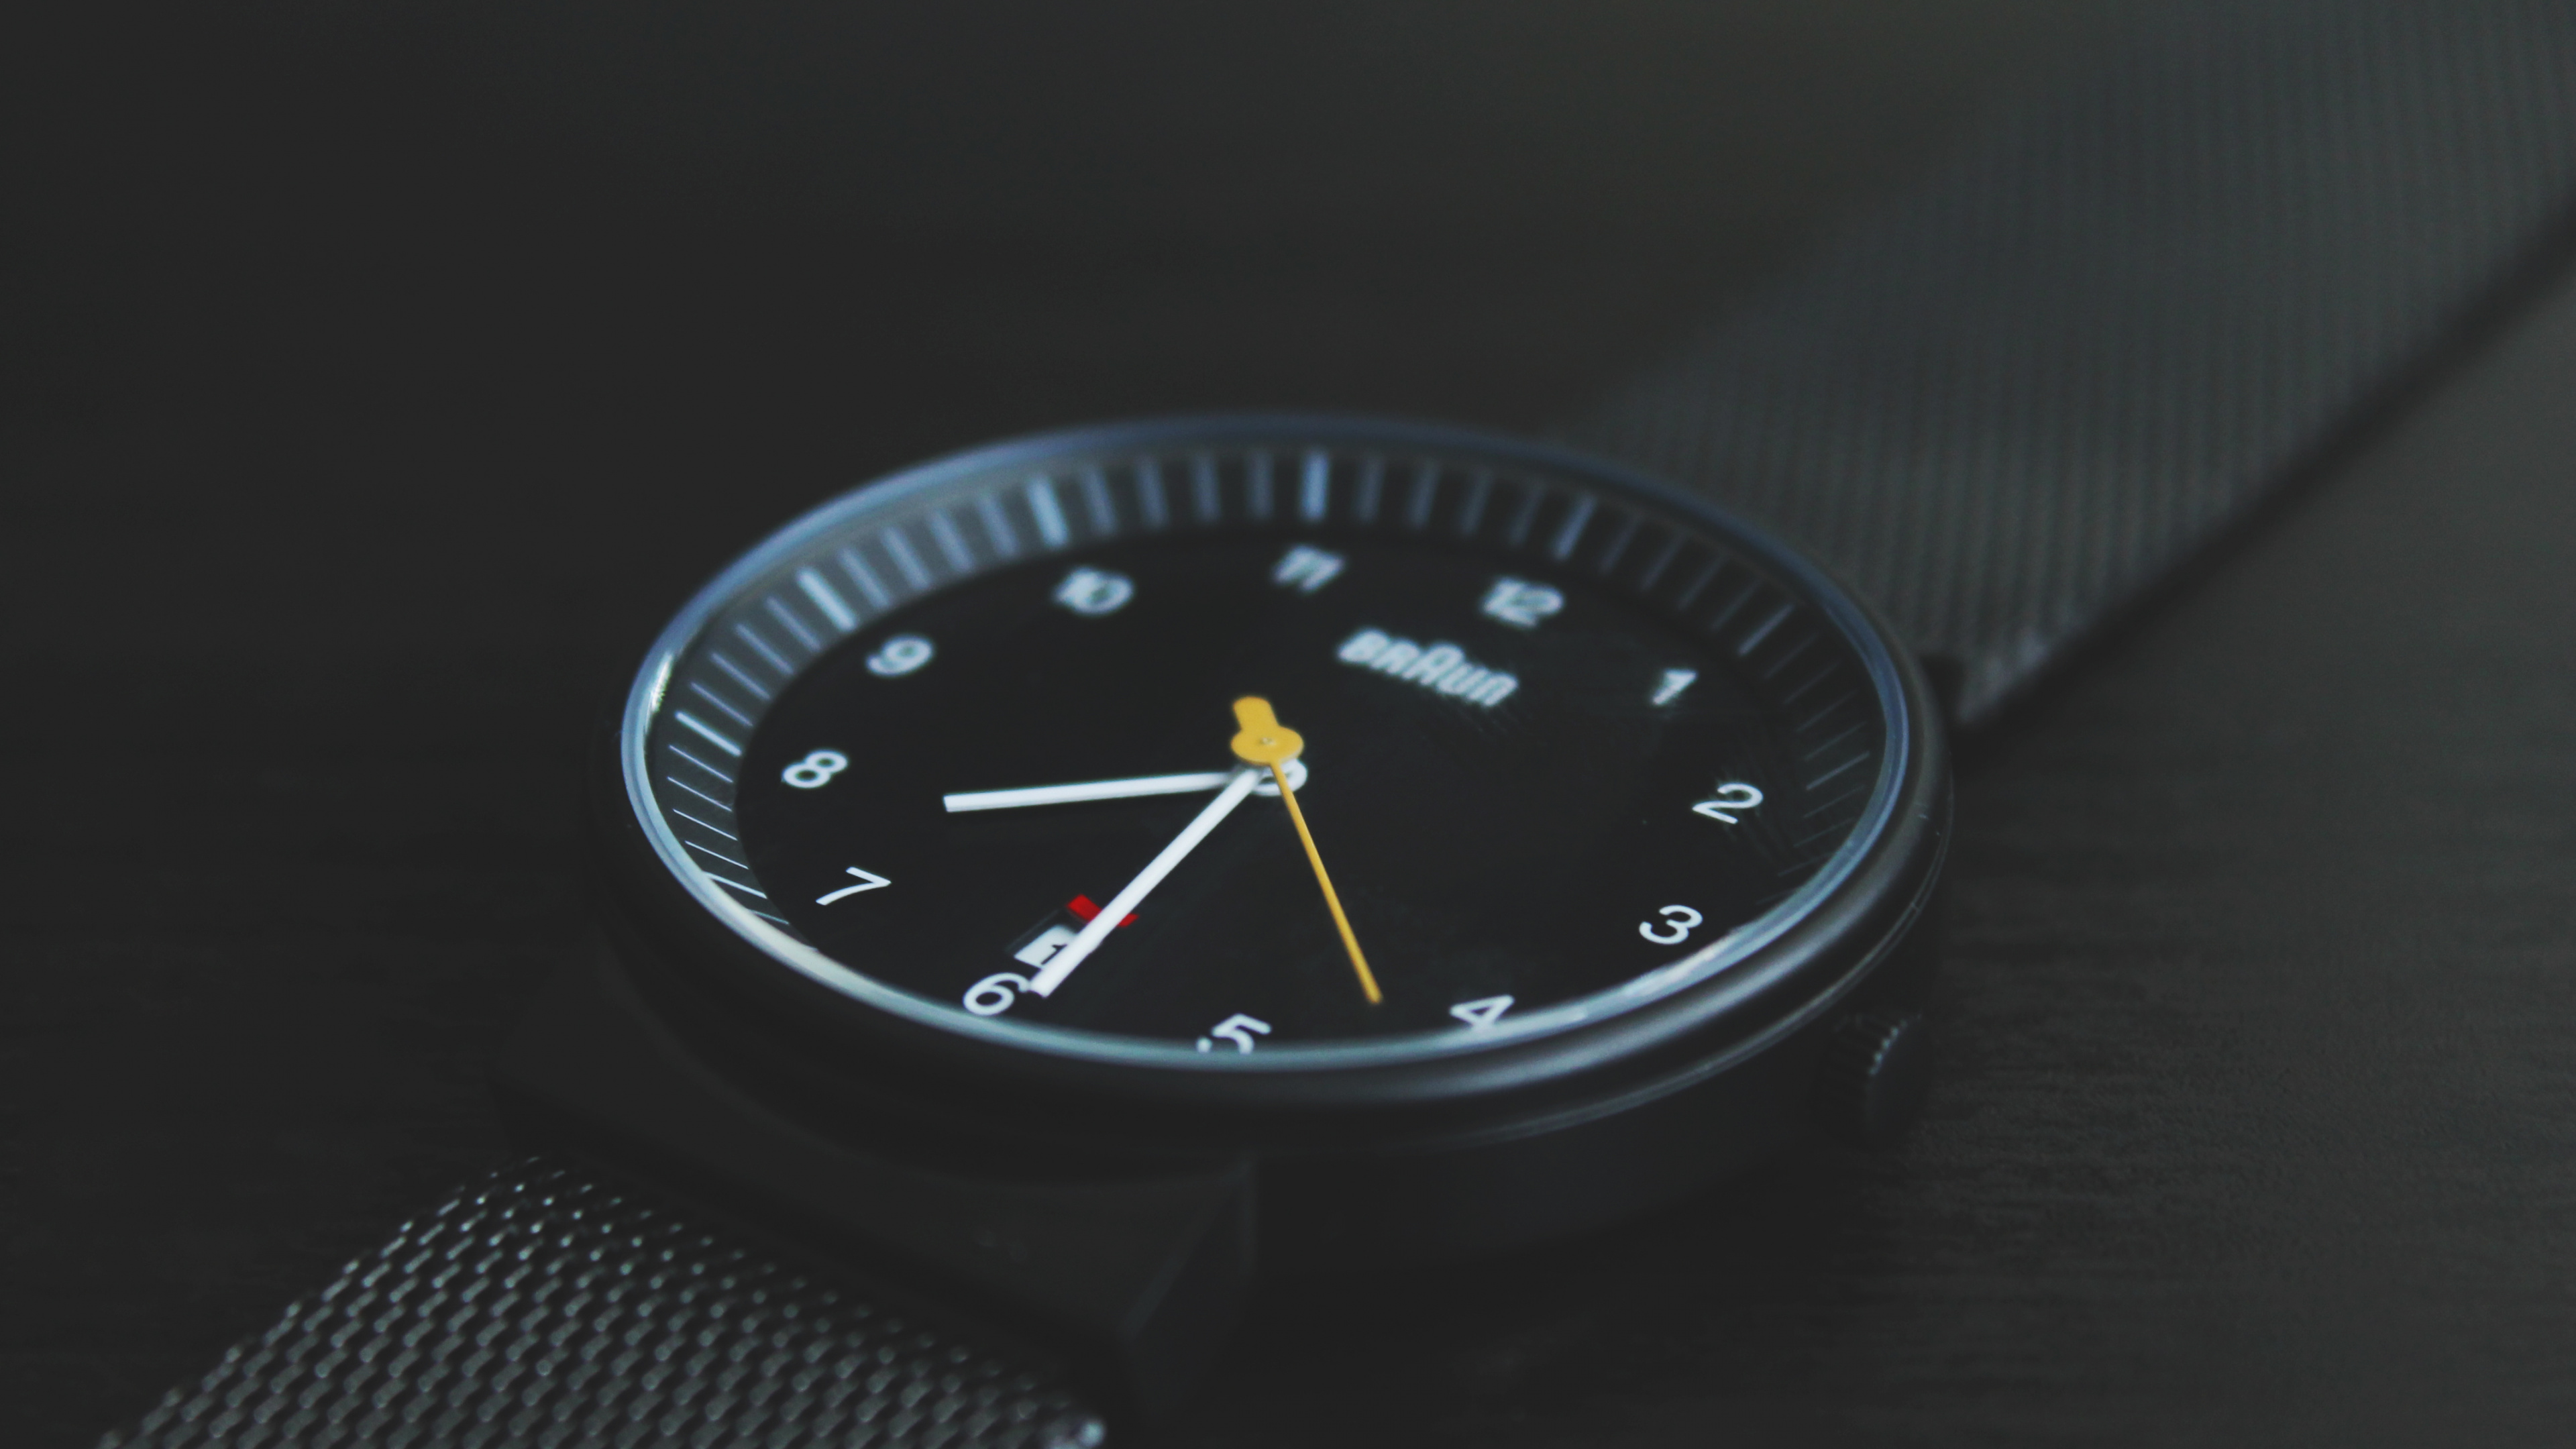 Black Analog Watch at 10 00. Wallpaper in 3840x2160 Resolution